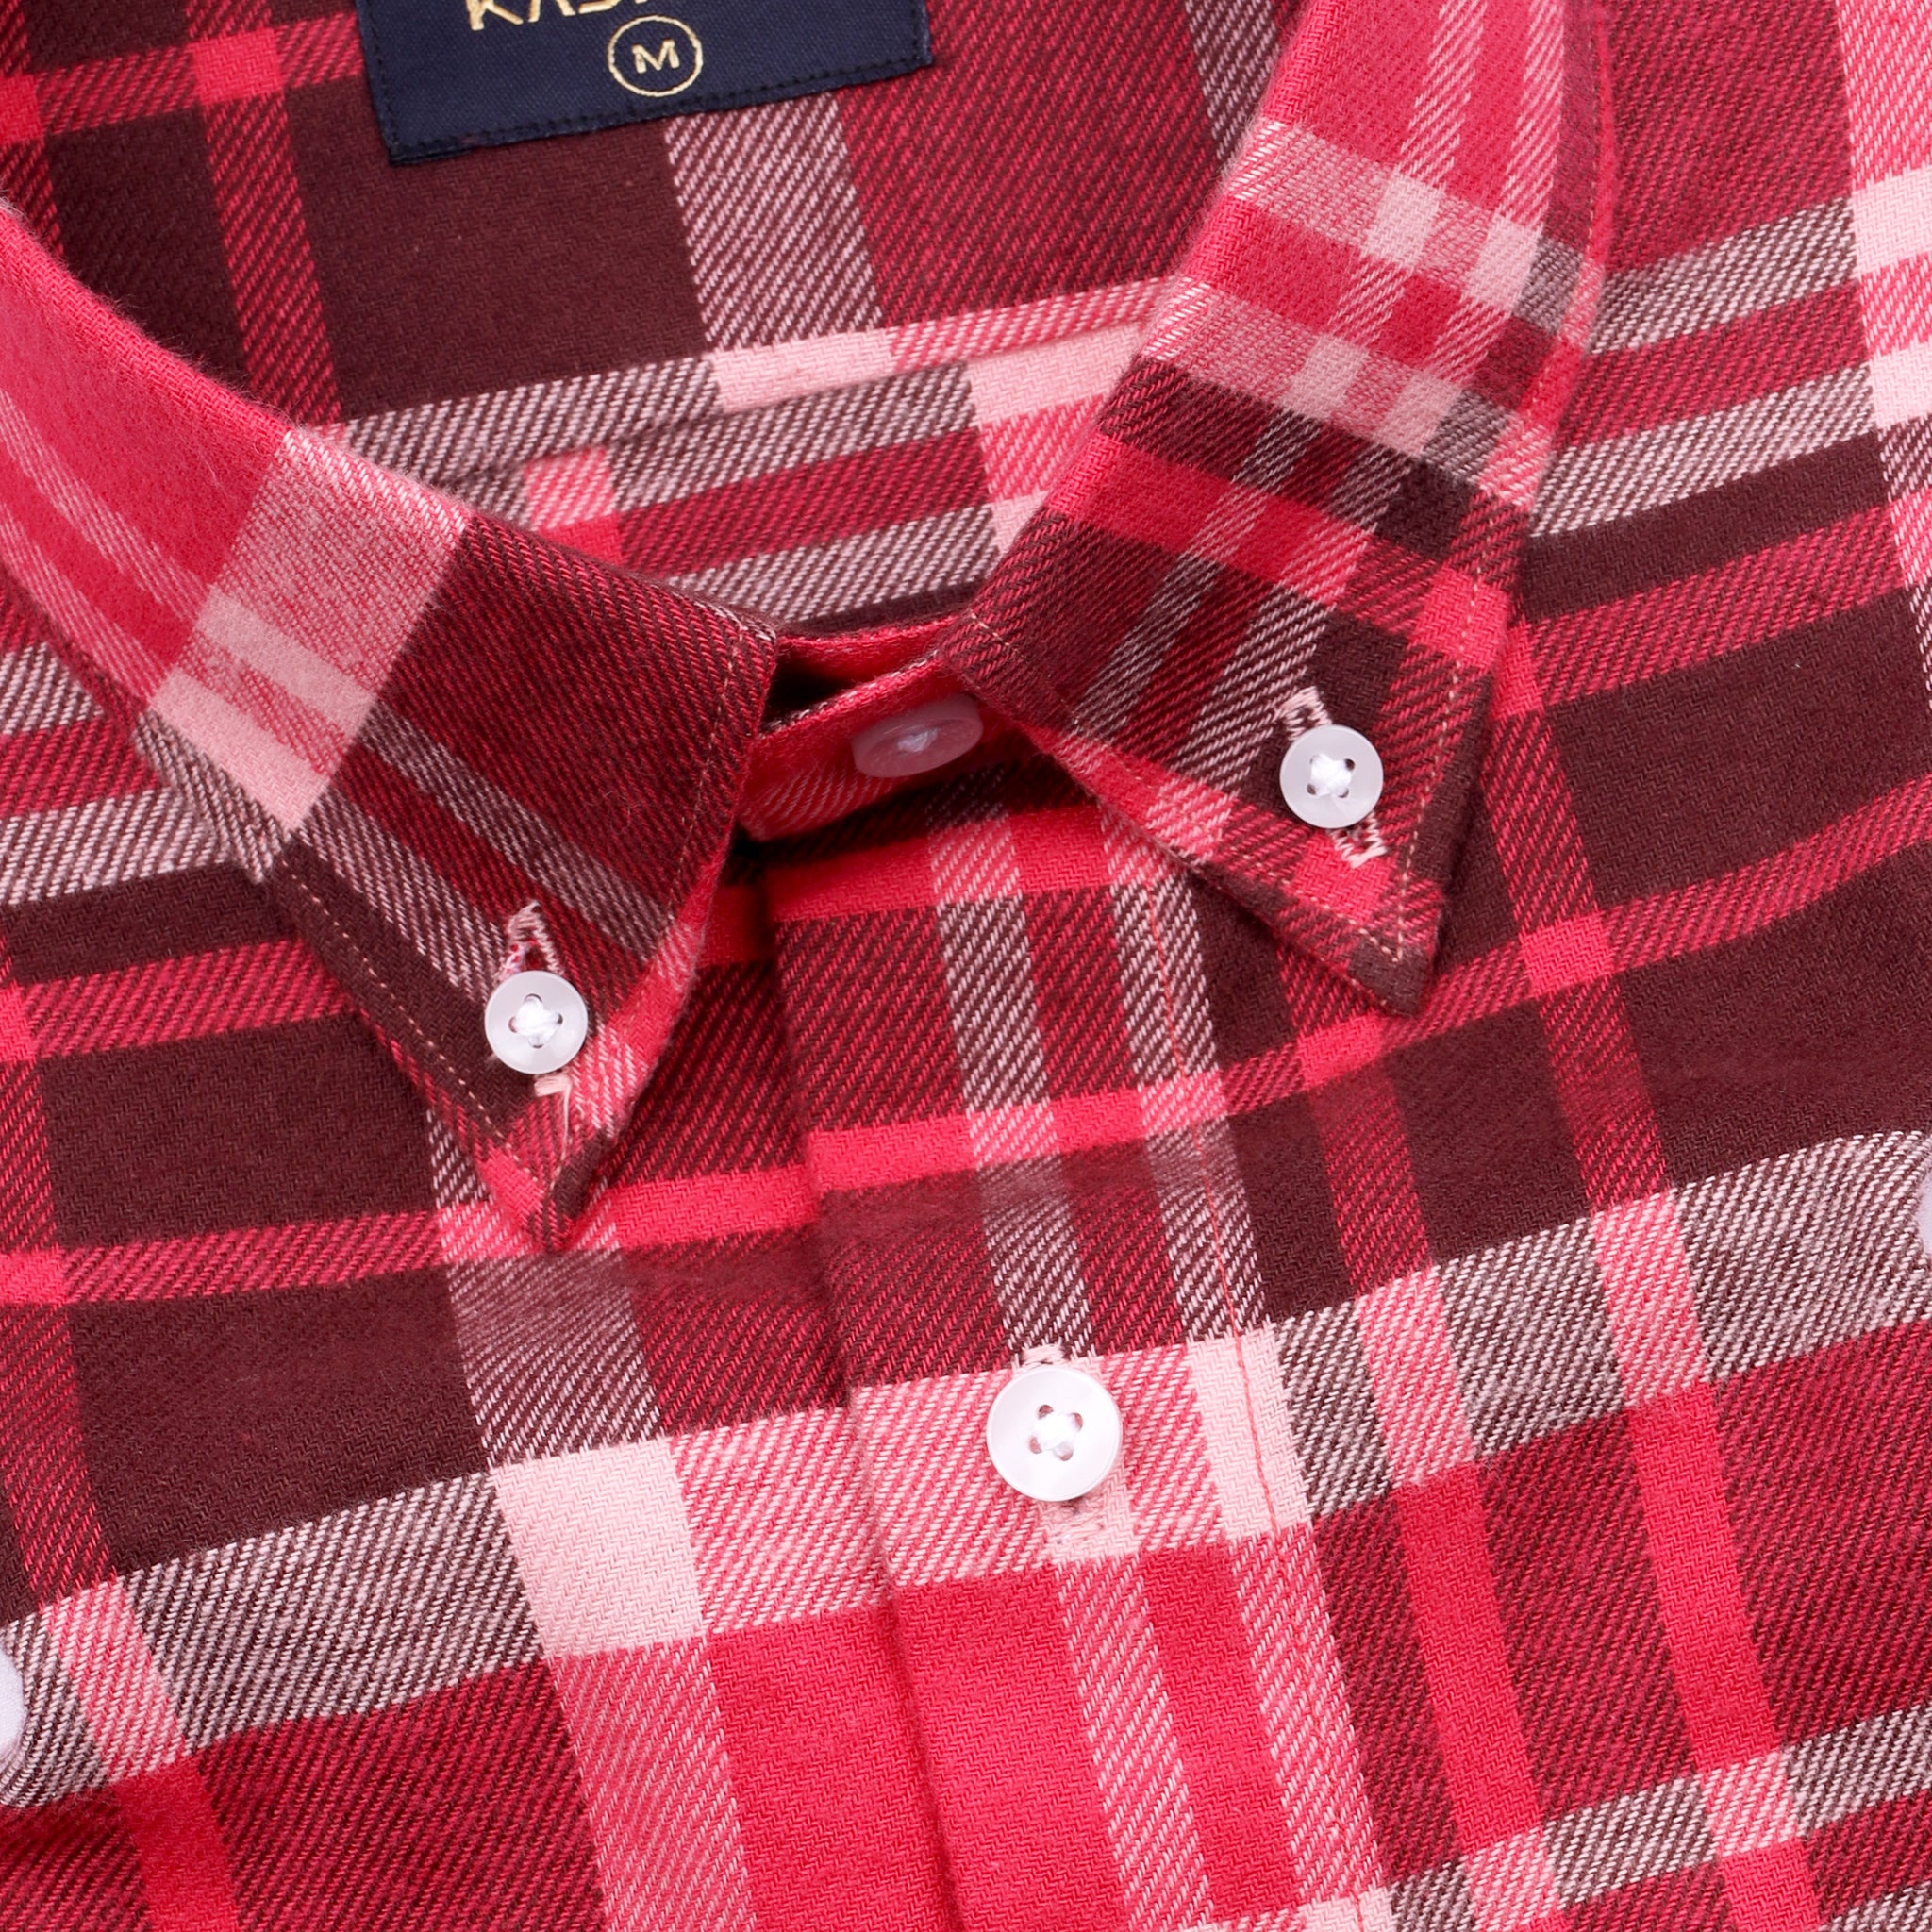 French Pink With Bright Marron Checkered Oxford Cotton Shirt